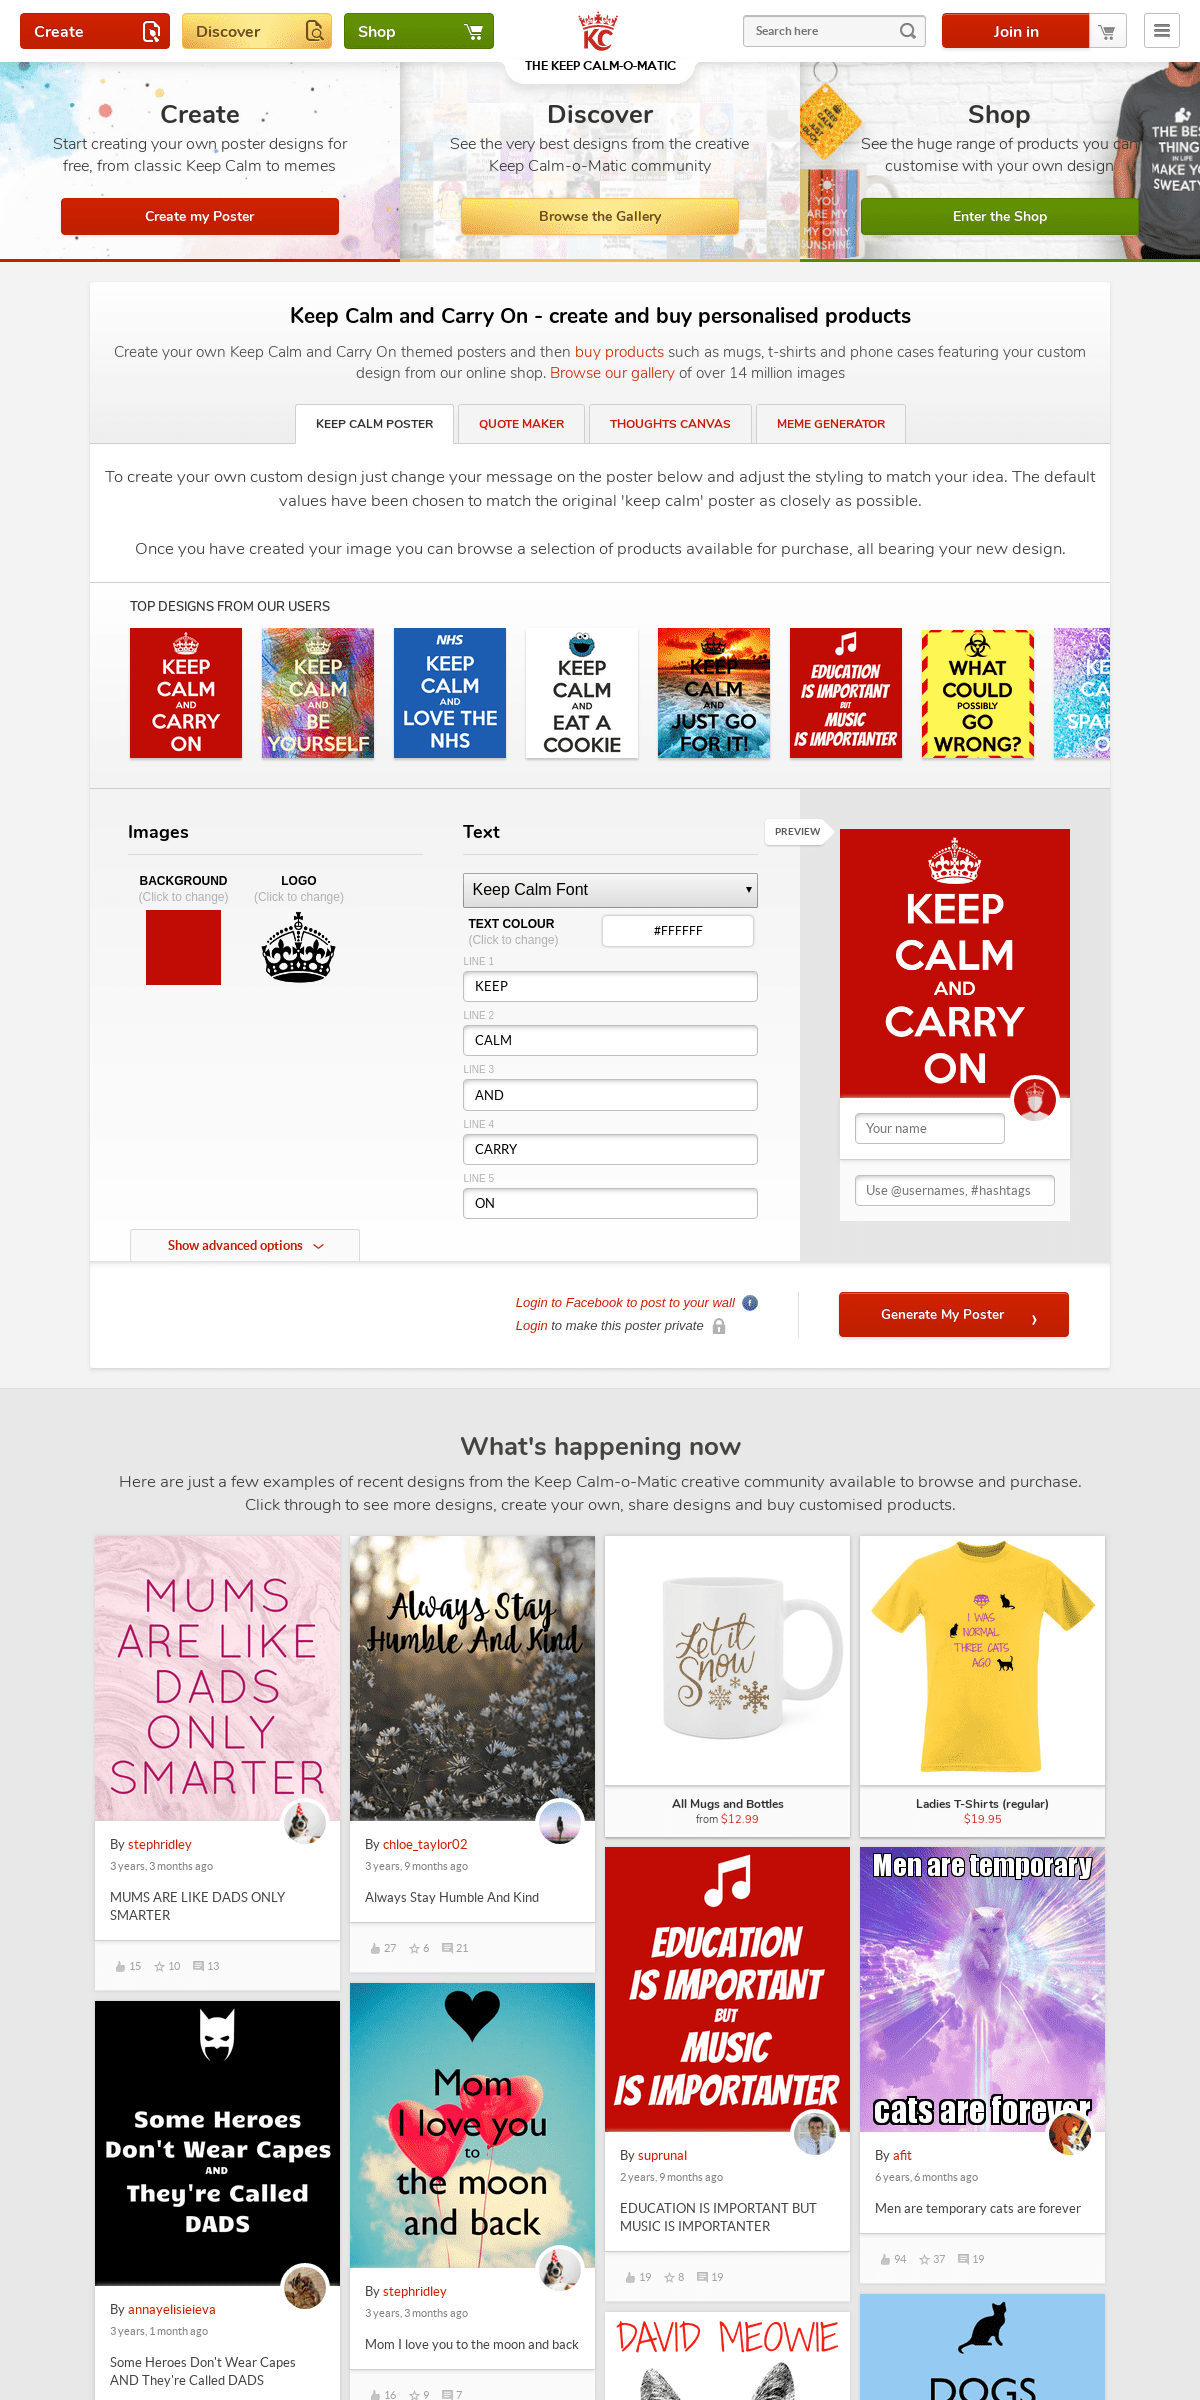 A complete backup of keepcalm-o-matic.co.uk